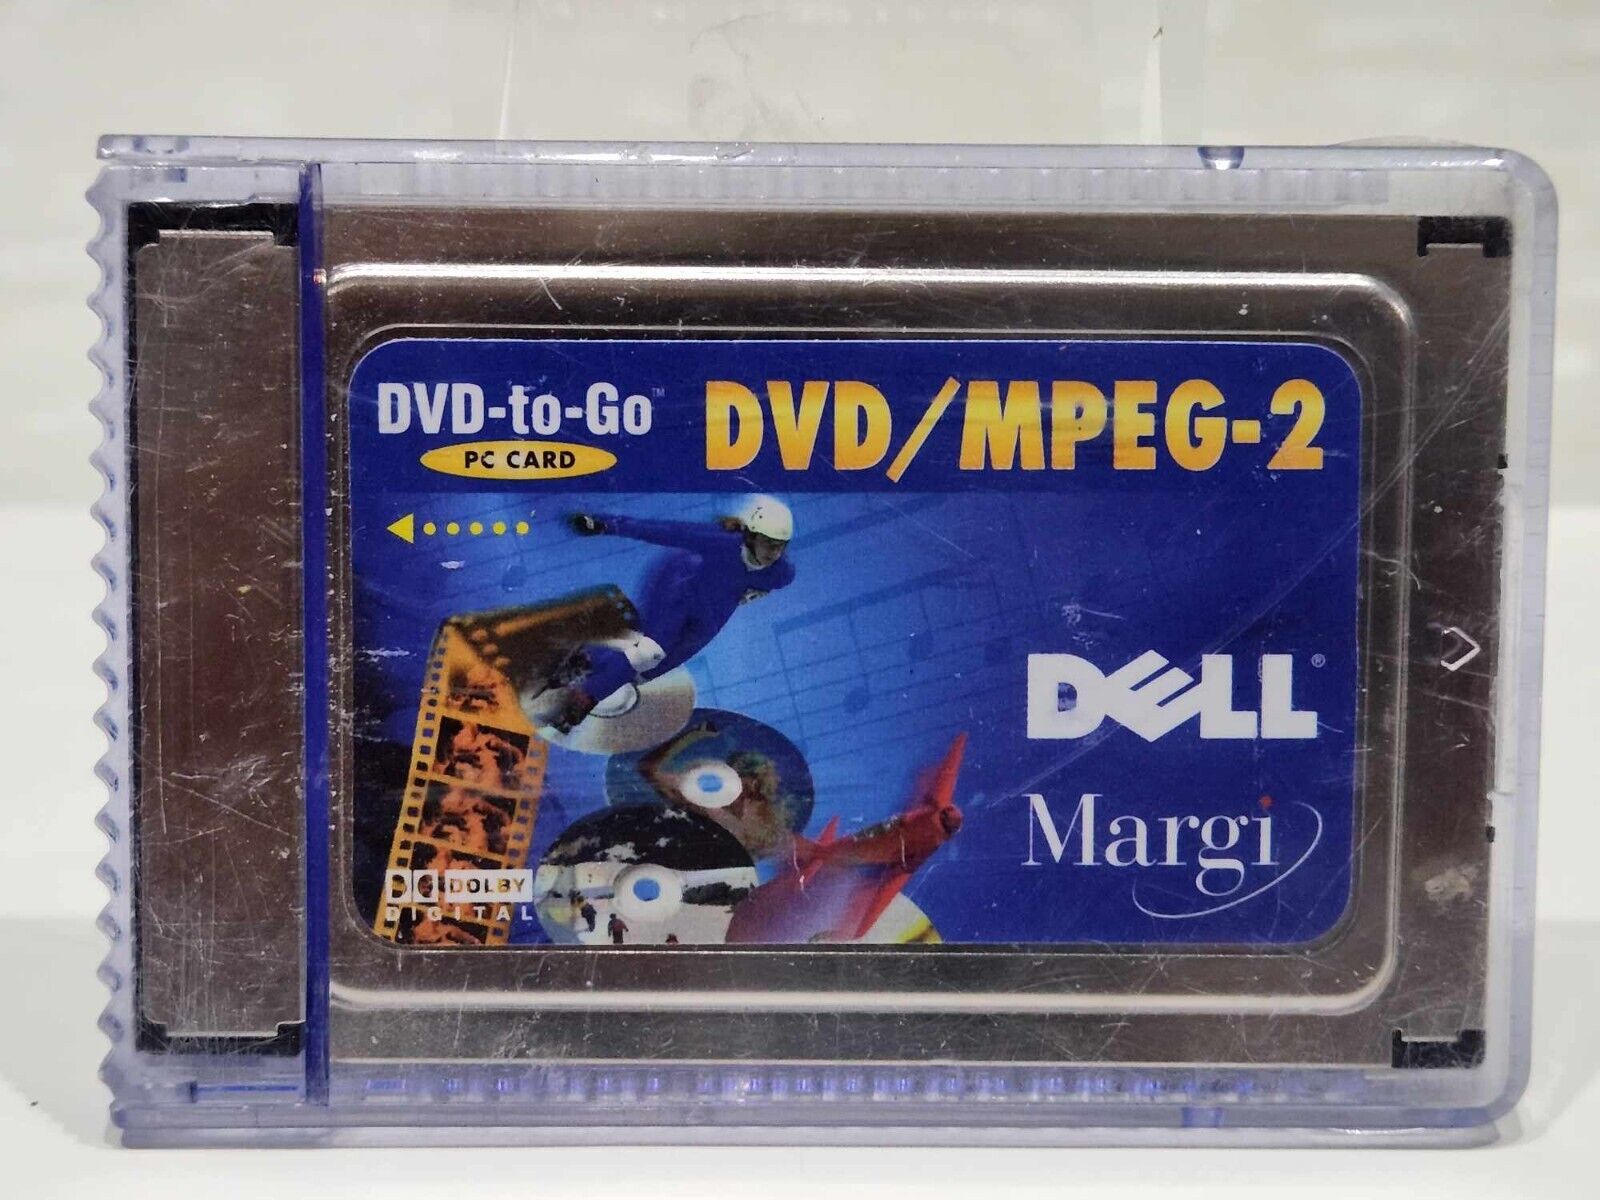 Enjoy Movies on the Go with a Dell Margi DVD-to-Go PCMCIA Card